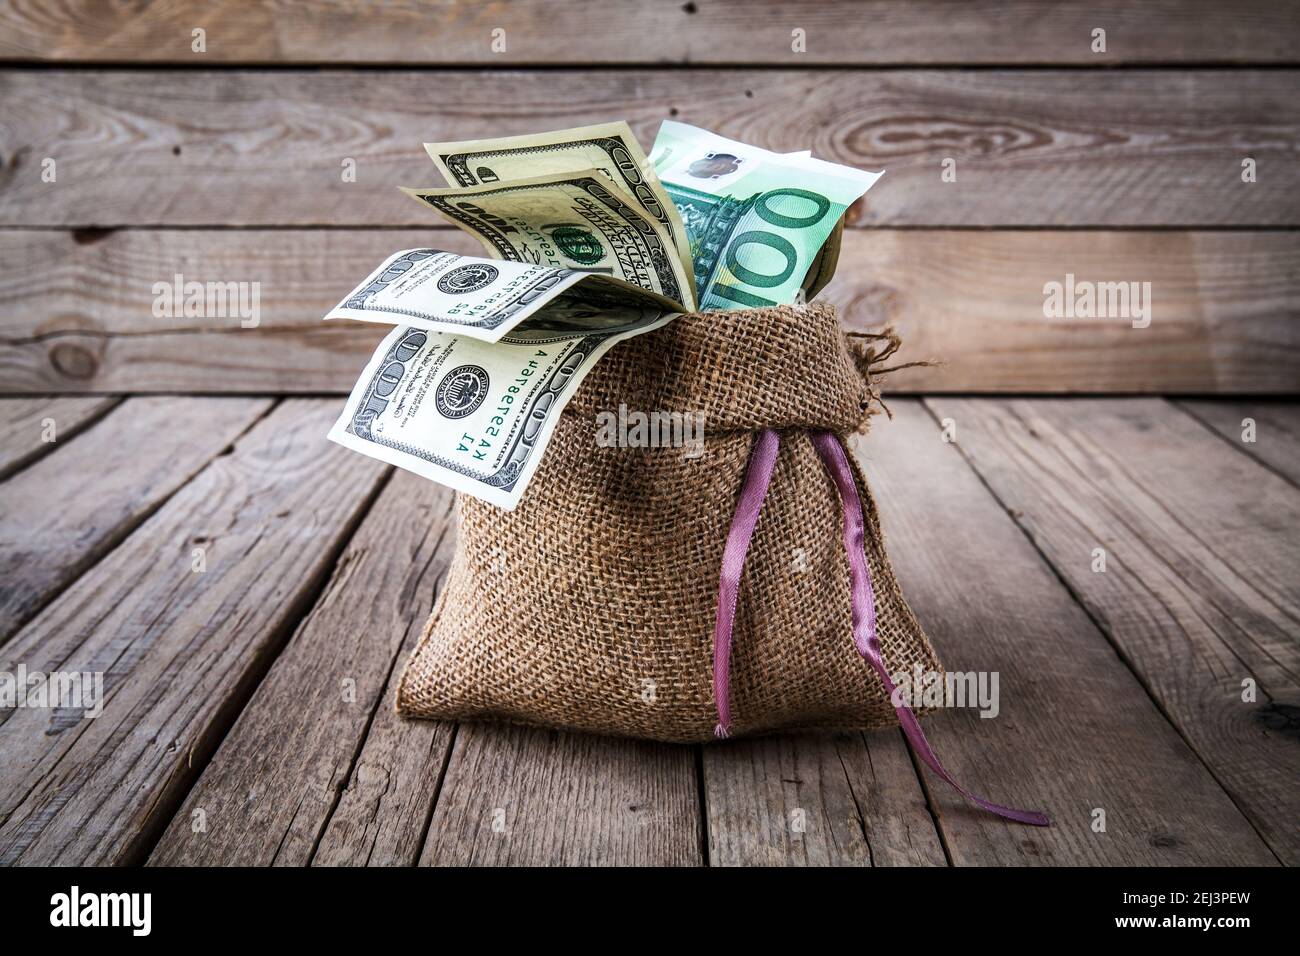 money in sackcloth and coins scattere andd on a wooden background and Stock Photo